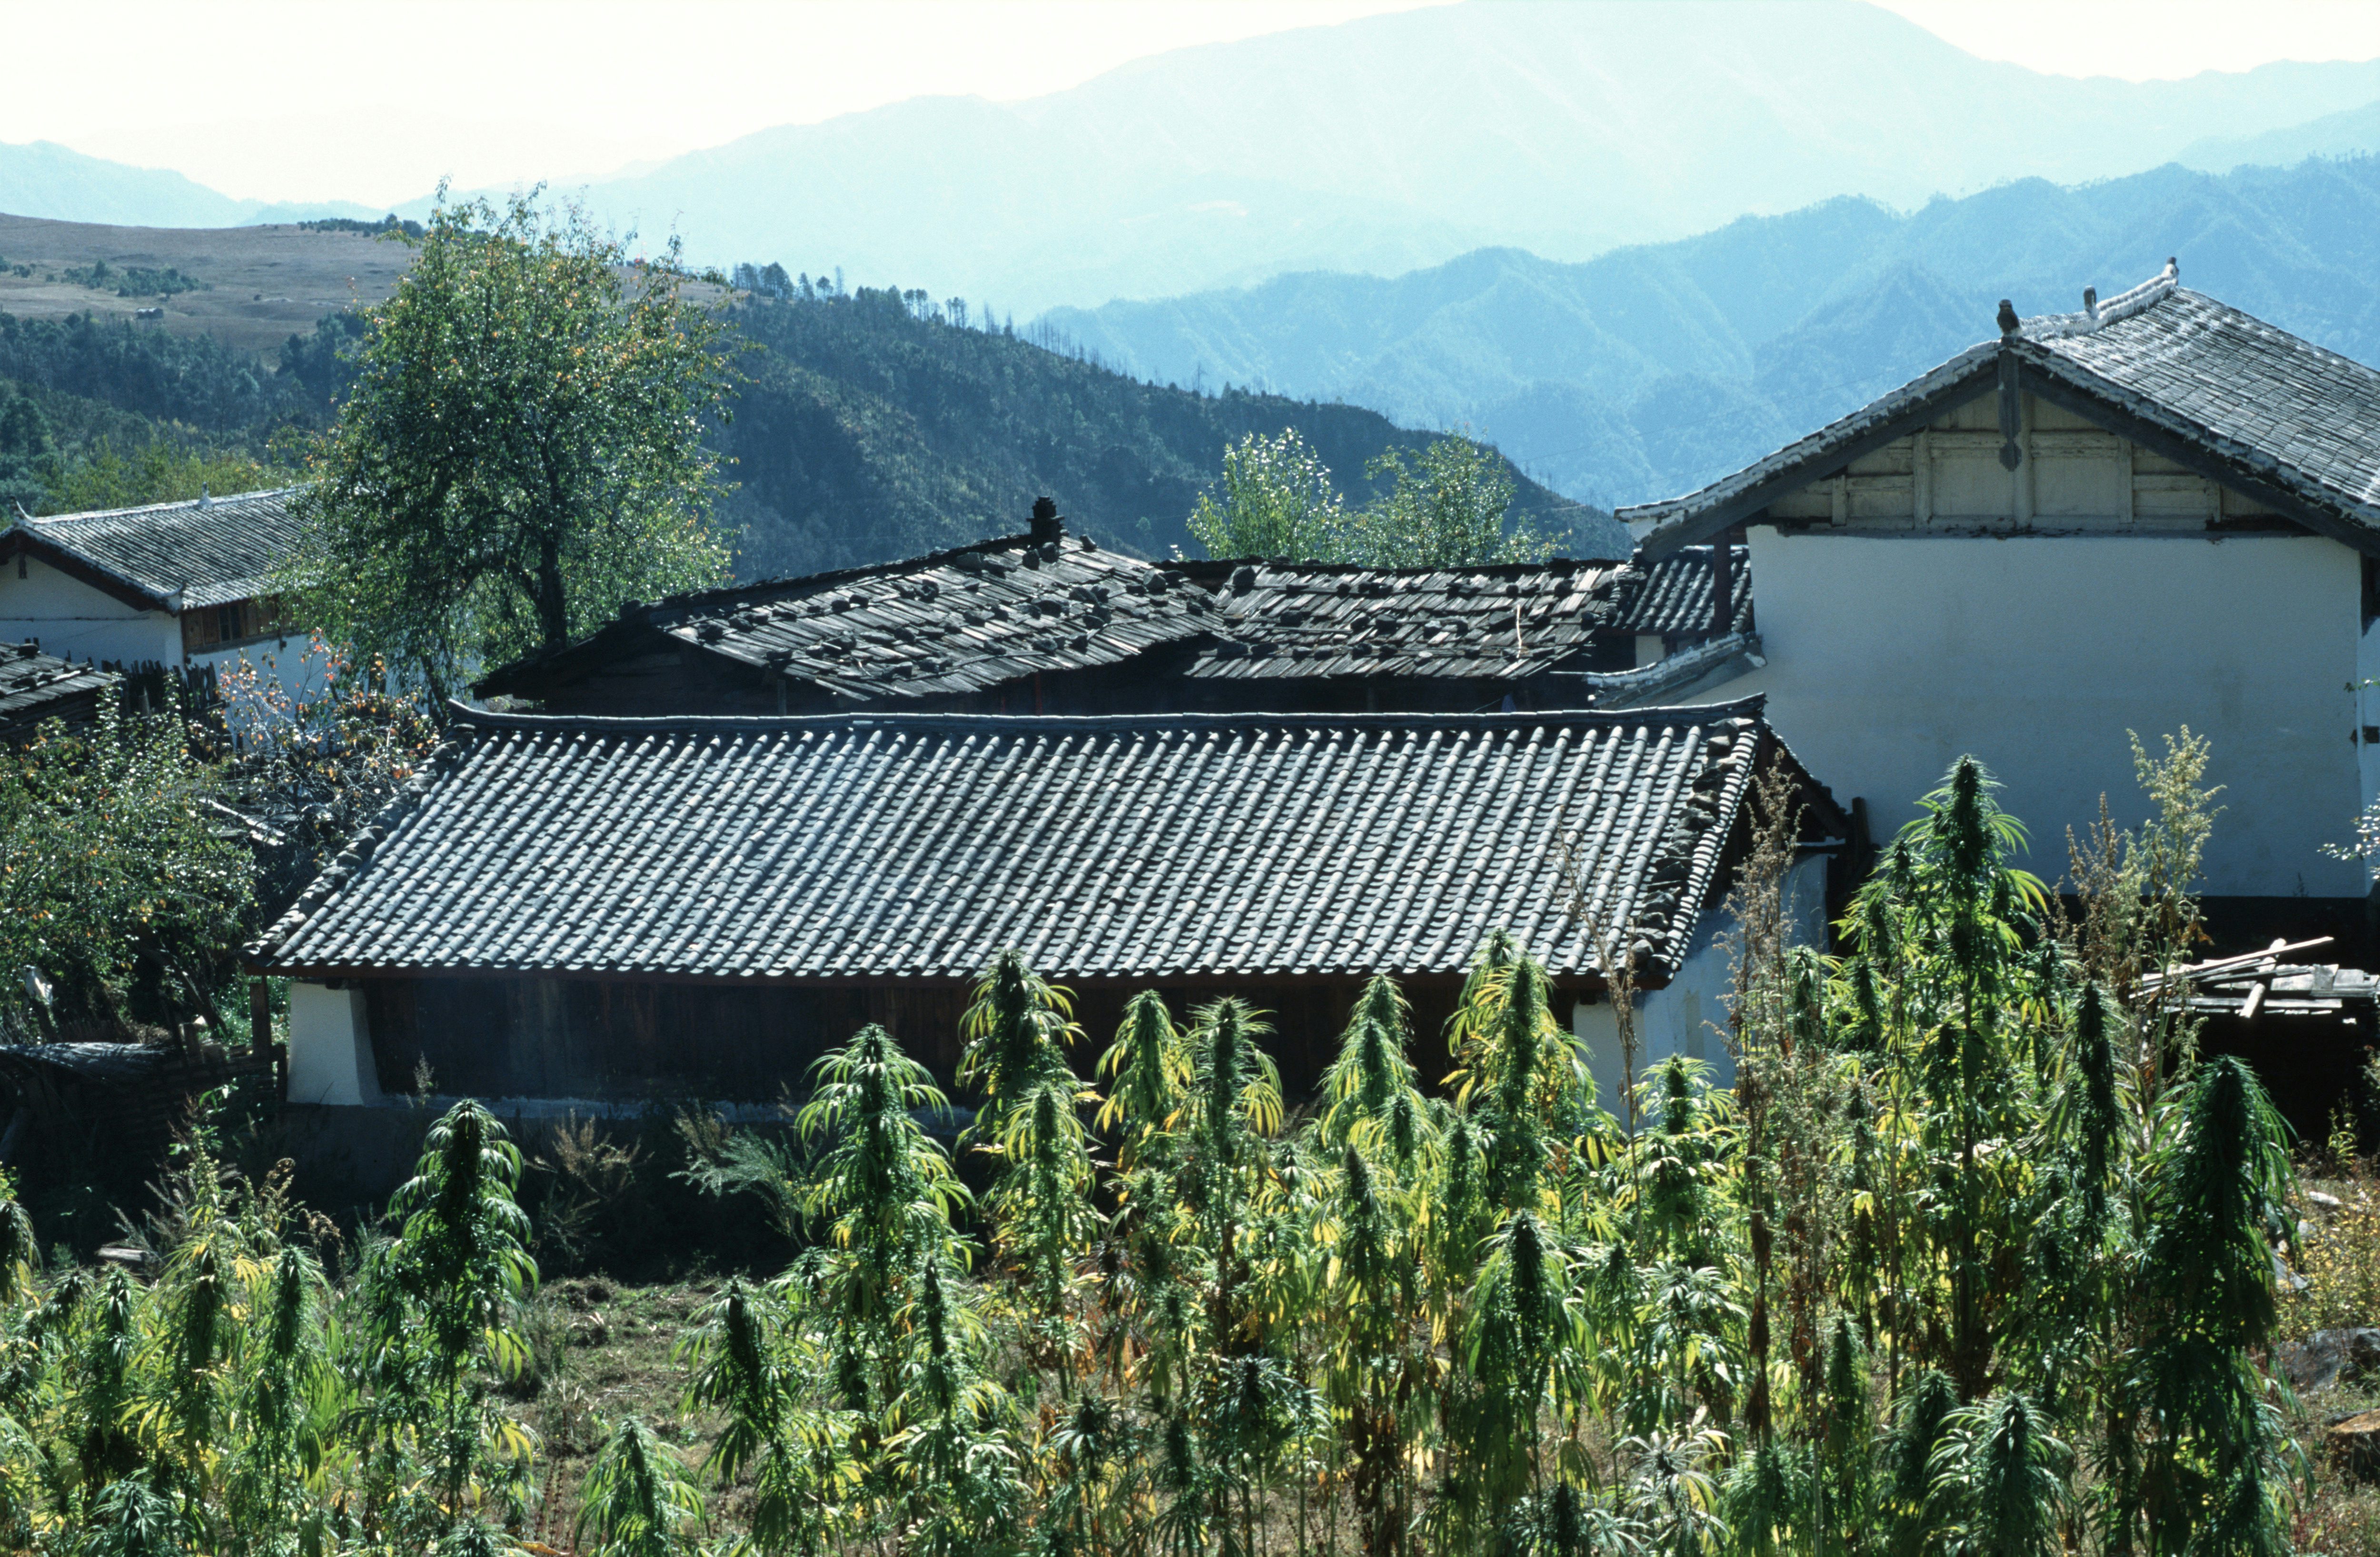 China could be the next cannabis powerhouse0 Best 420 Vacation Ideas for Under $200